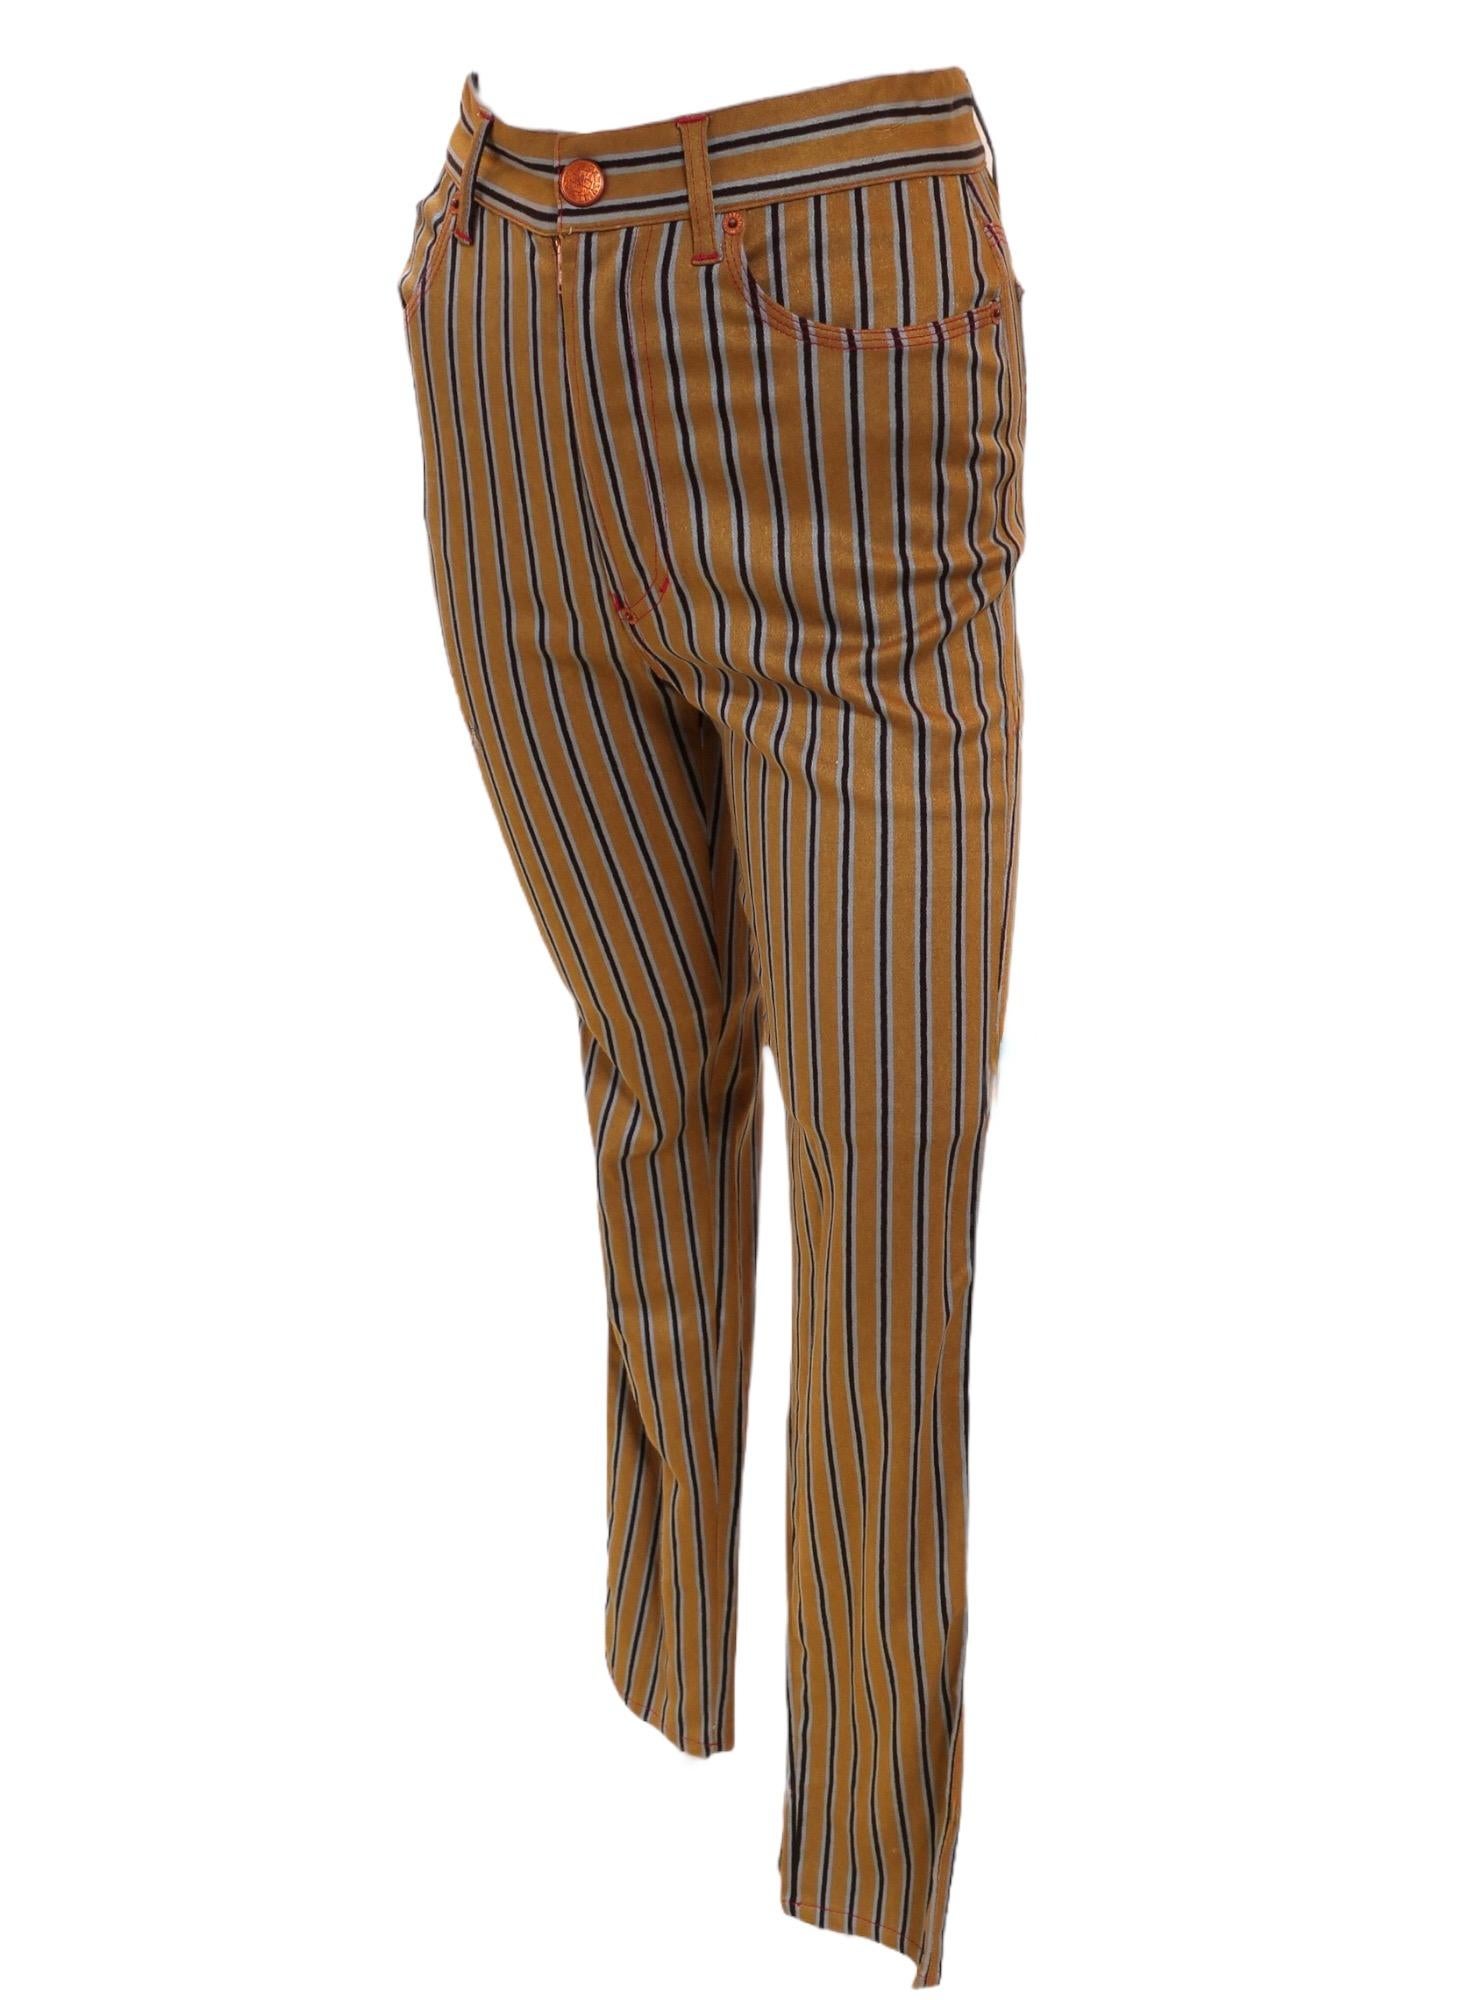 These stretch pants from vintage Jean Paul Gaultier are spectacular! The neutral base color is punctuated not only by the black and grey vertical striping but also by the contrasting red stitching along the seams and pockets. Gaultier Jean's label